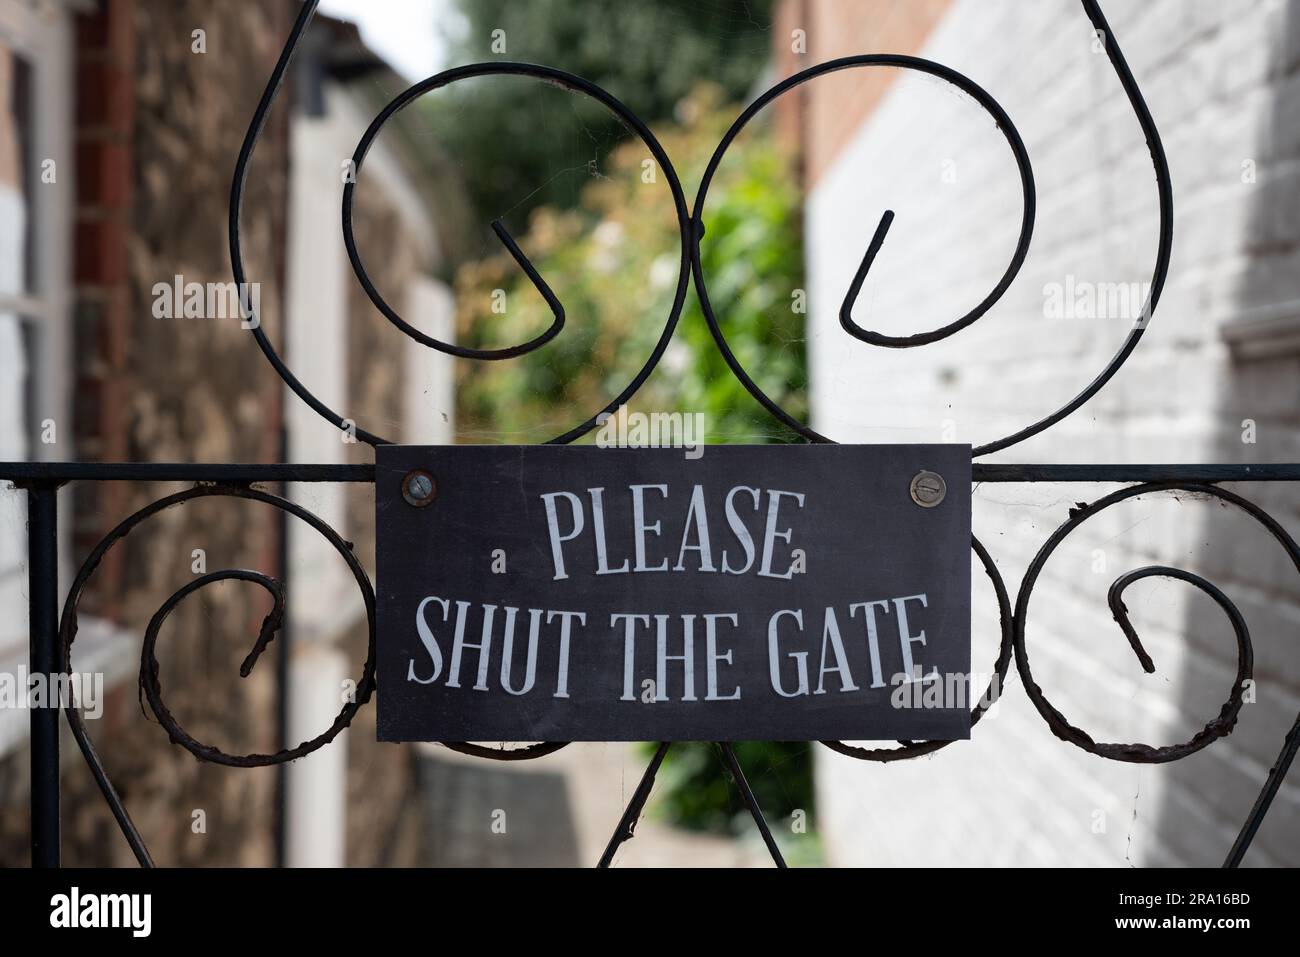 Polite notice reminding people to shut the gate mounted on an ornate metal gate. Stock Photo